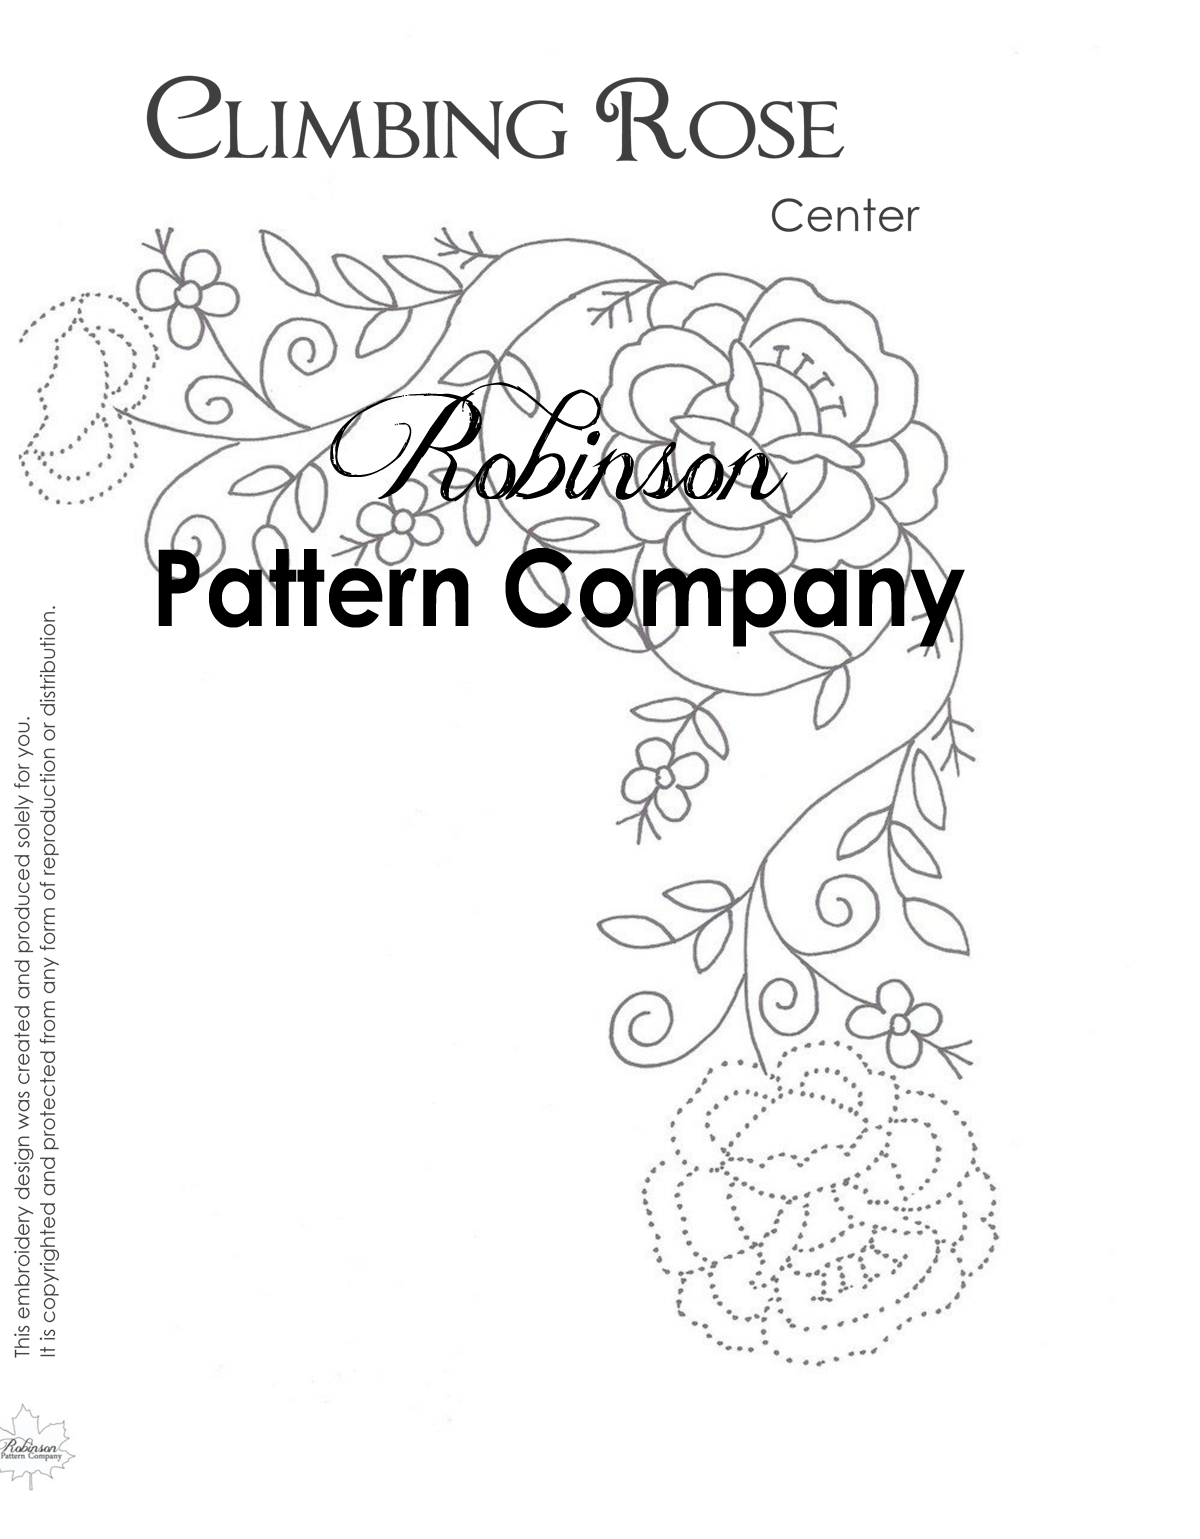 Climbing Rose Hand Embroidery pattern